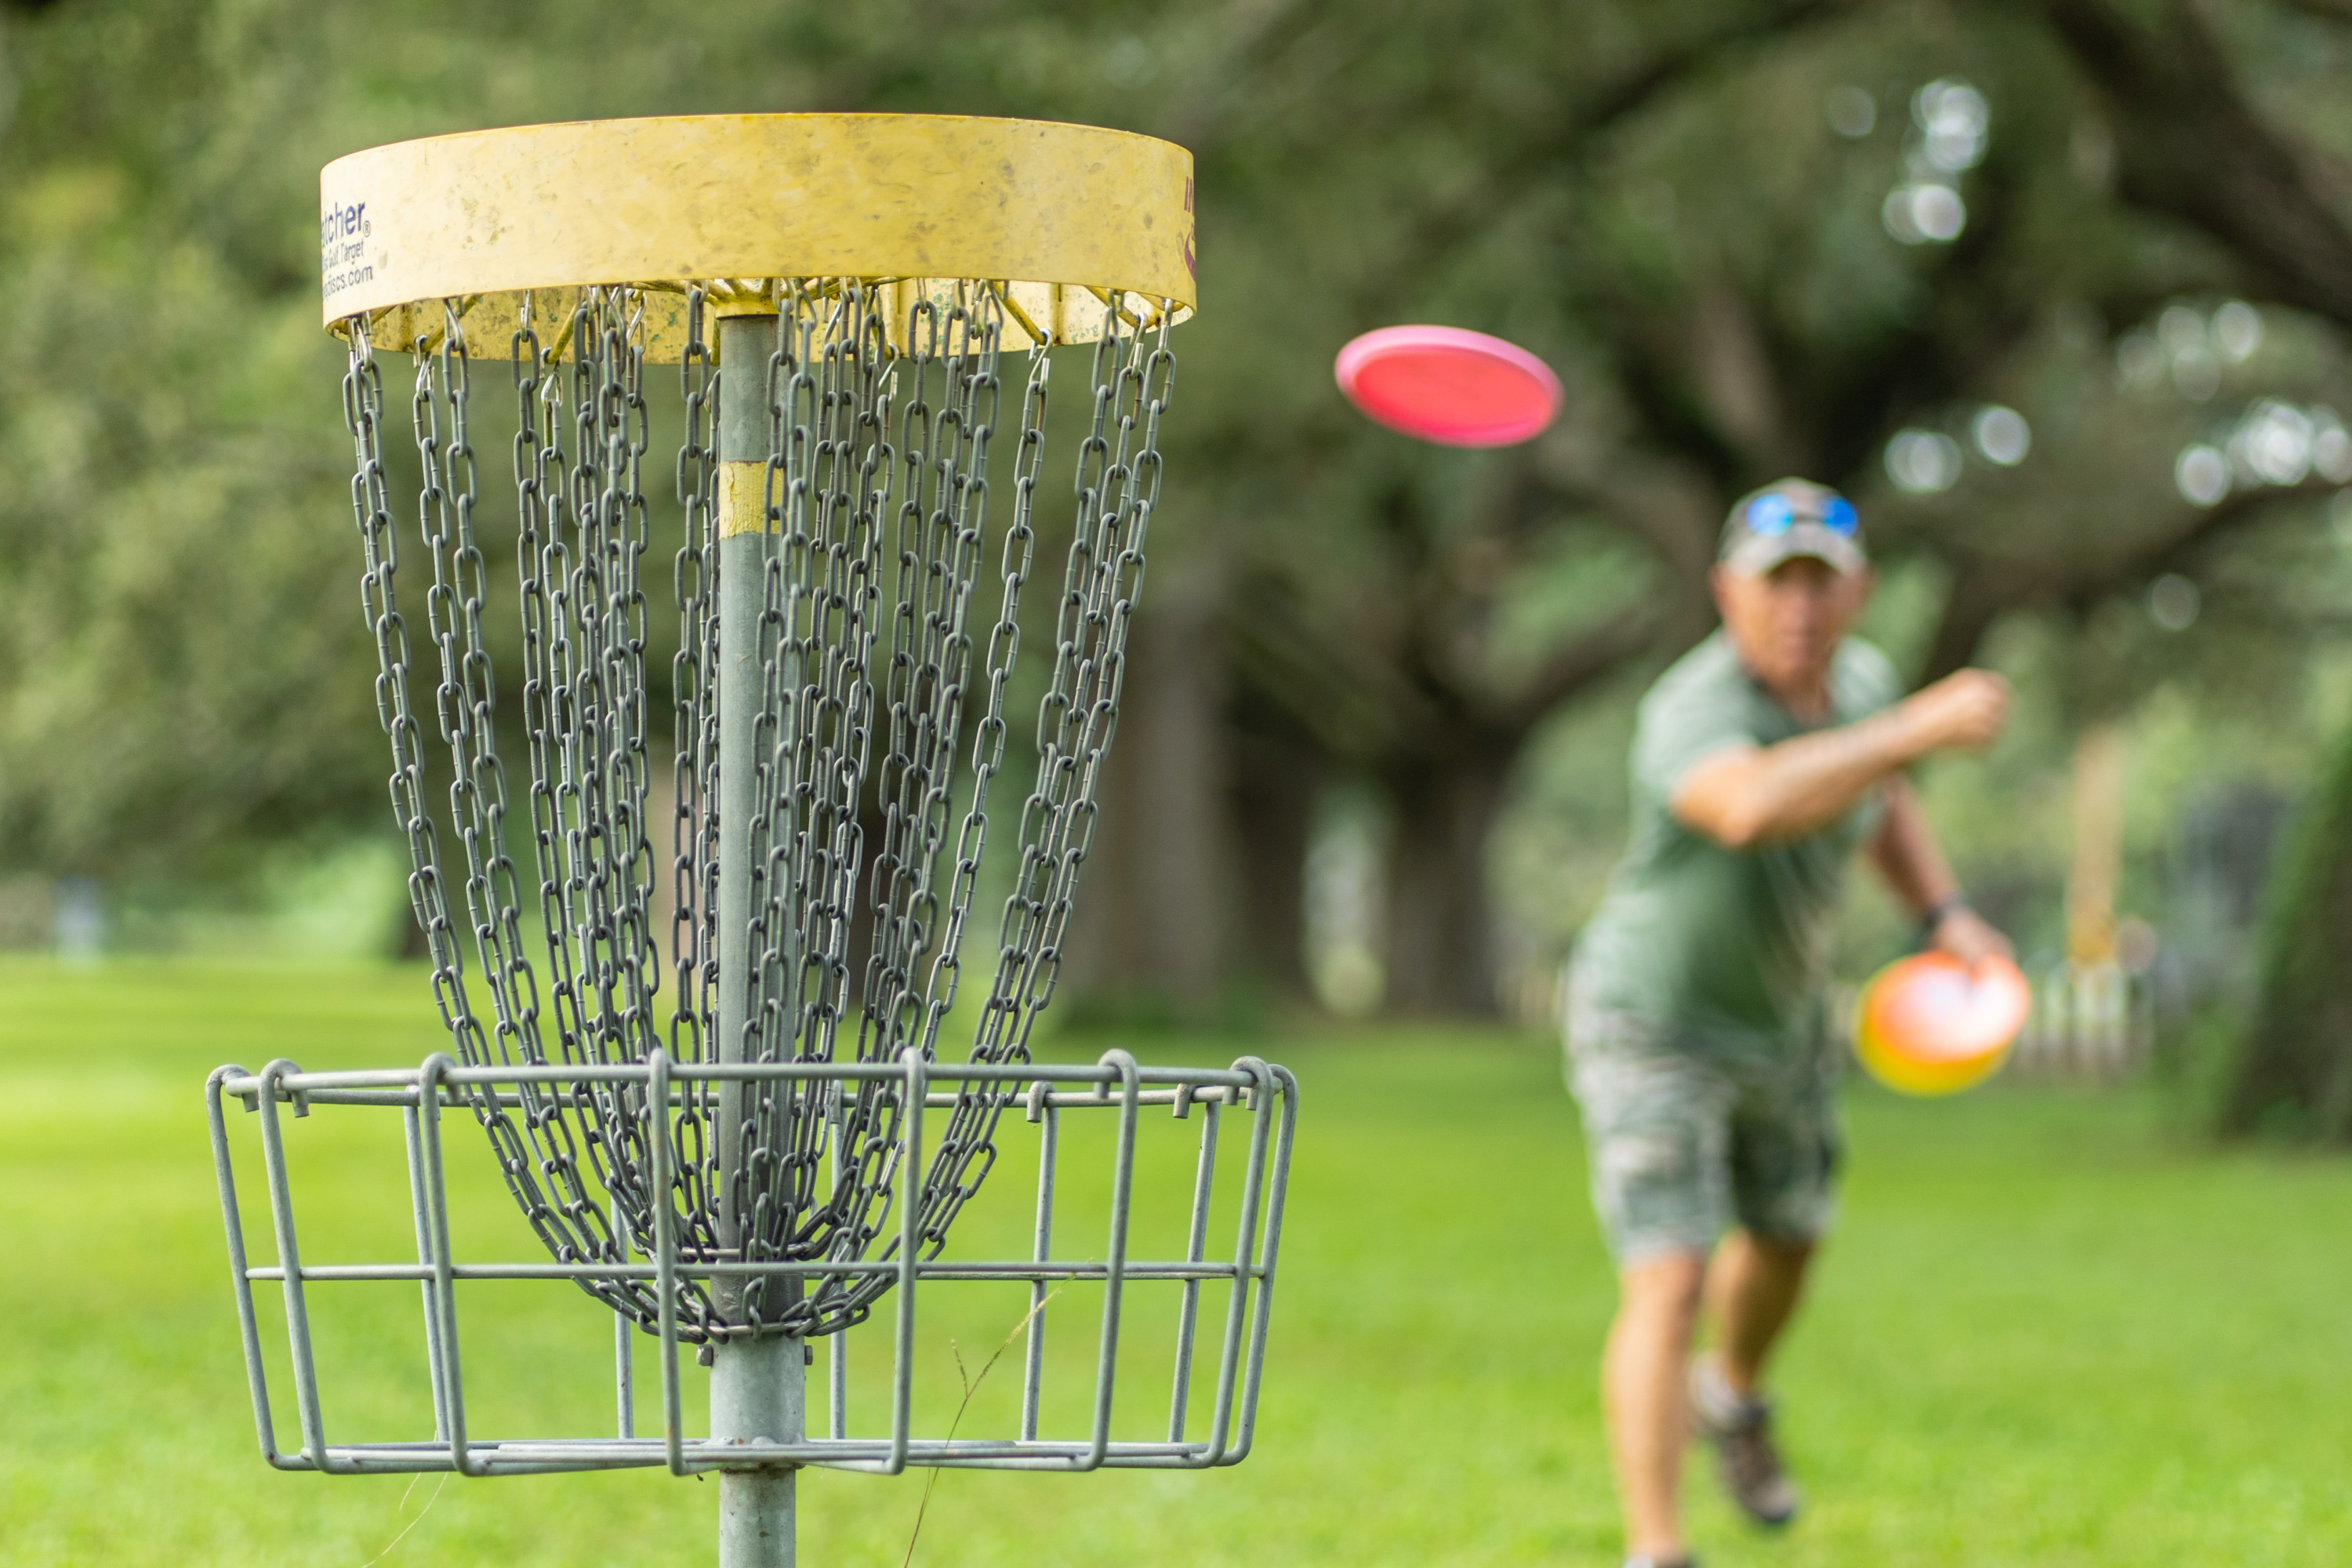 Quiz: Who is This Professional Disc Golfer?